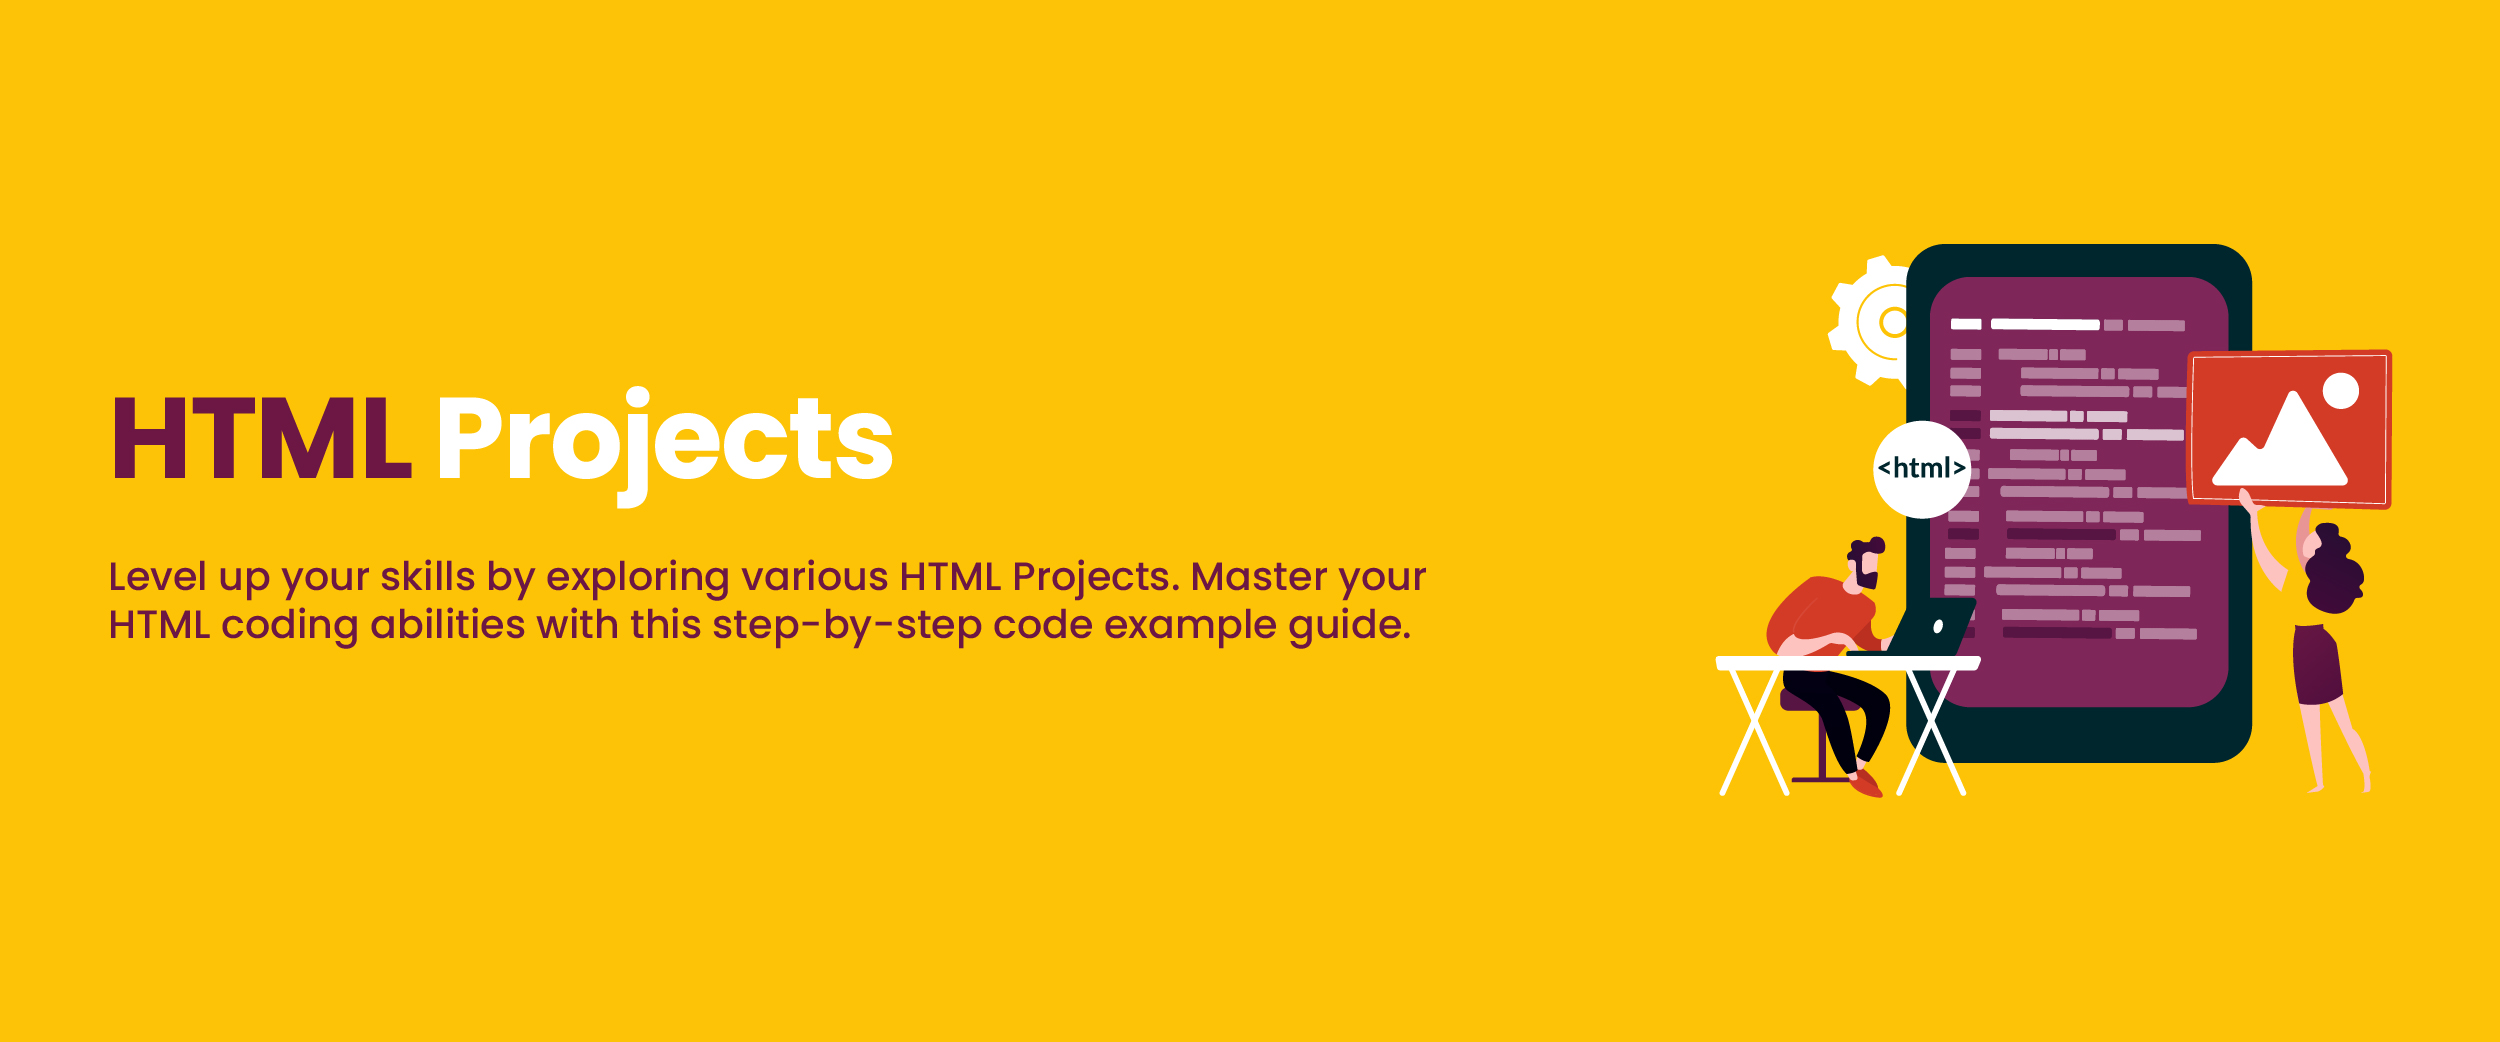 HTML Projects